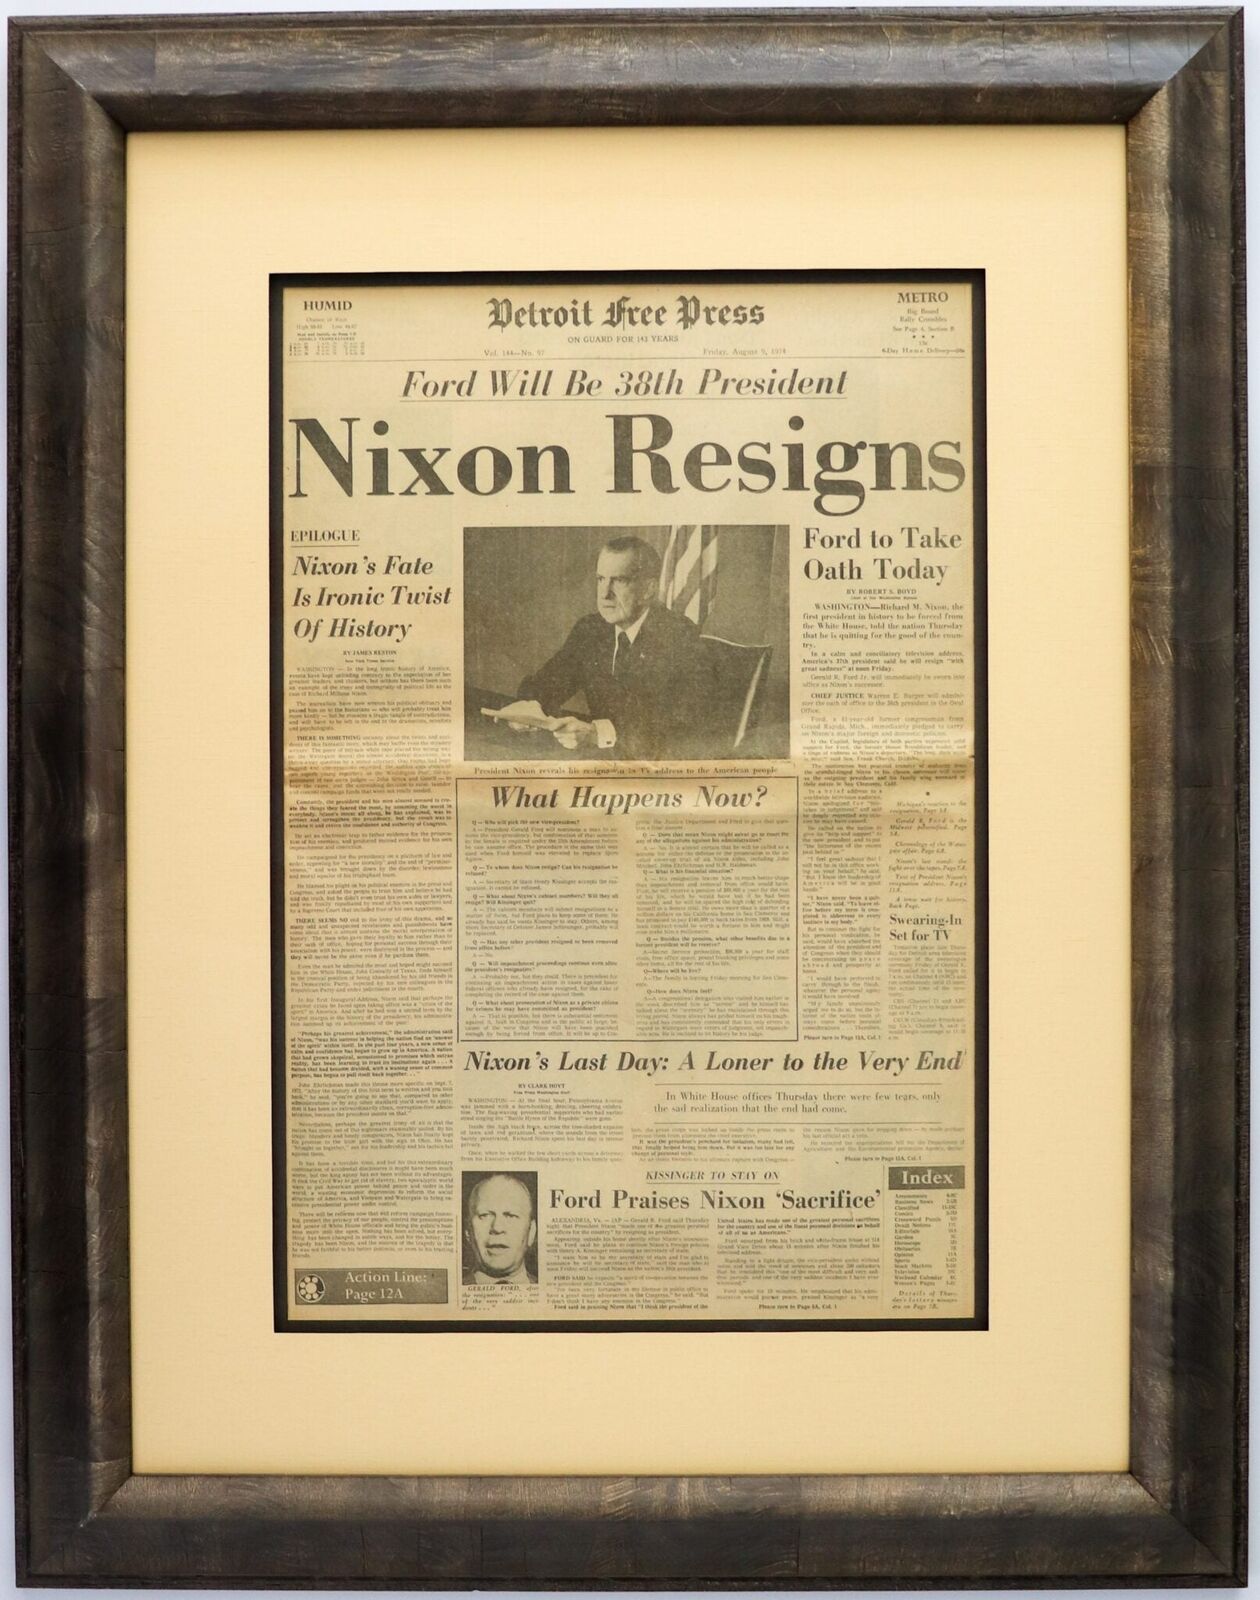 Framed The Detroit News Front Page: “Nixon Resigns”